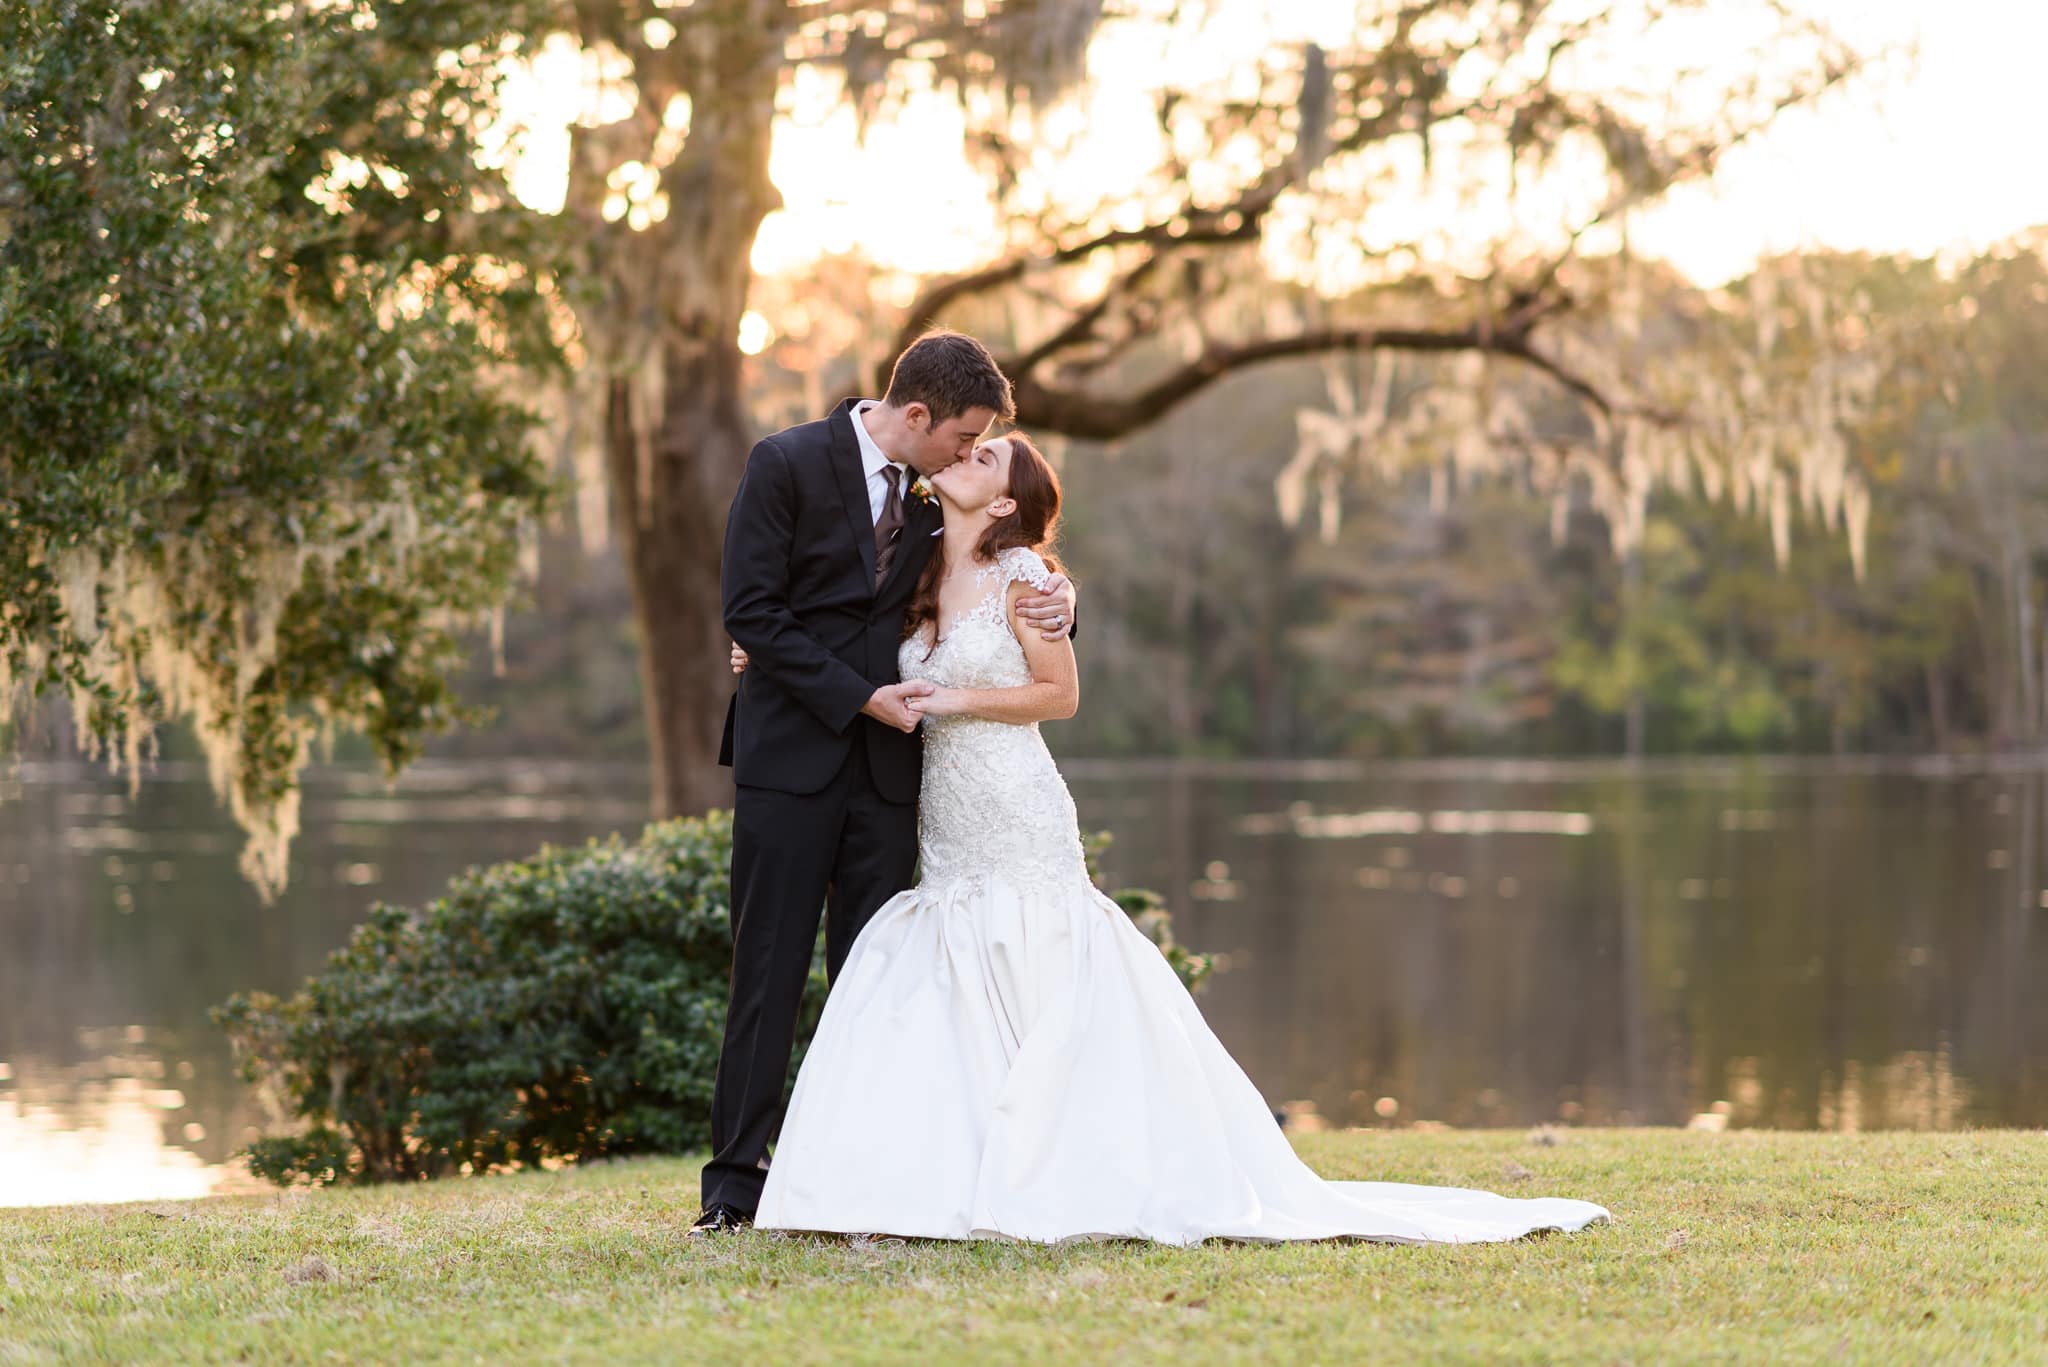 Kiss in the sunset at the Waccamaw River - Wachesaw Plantation